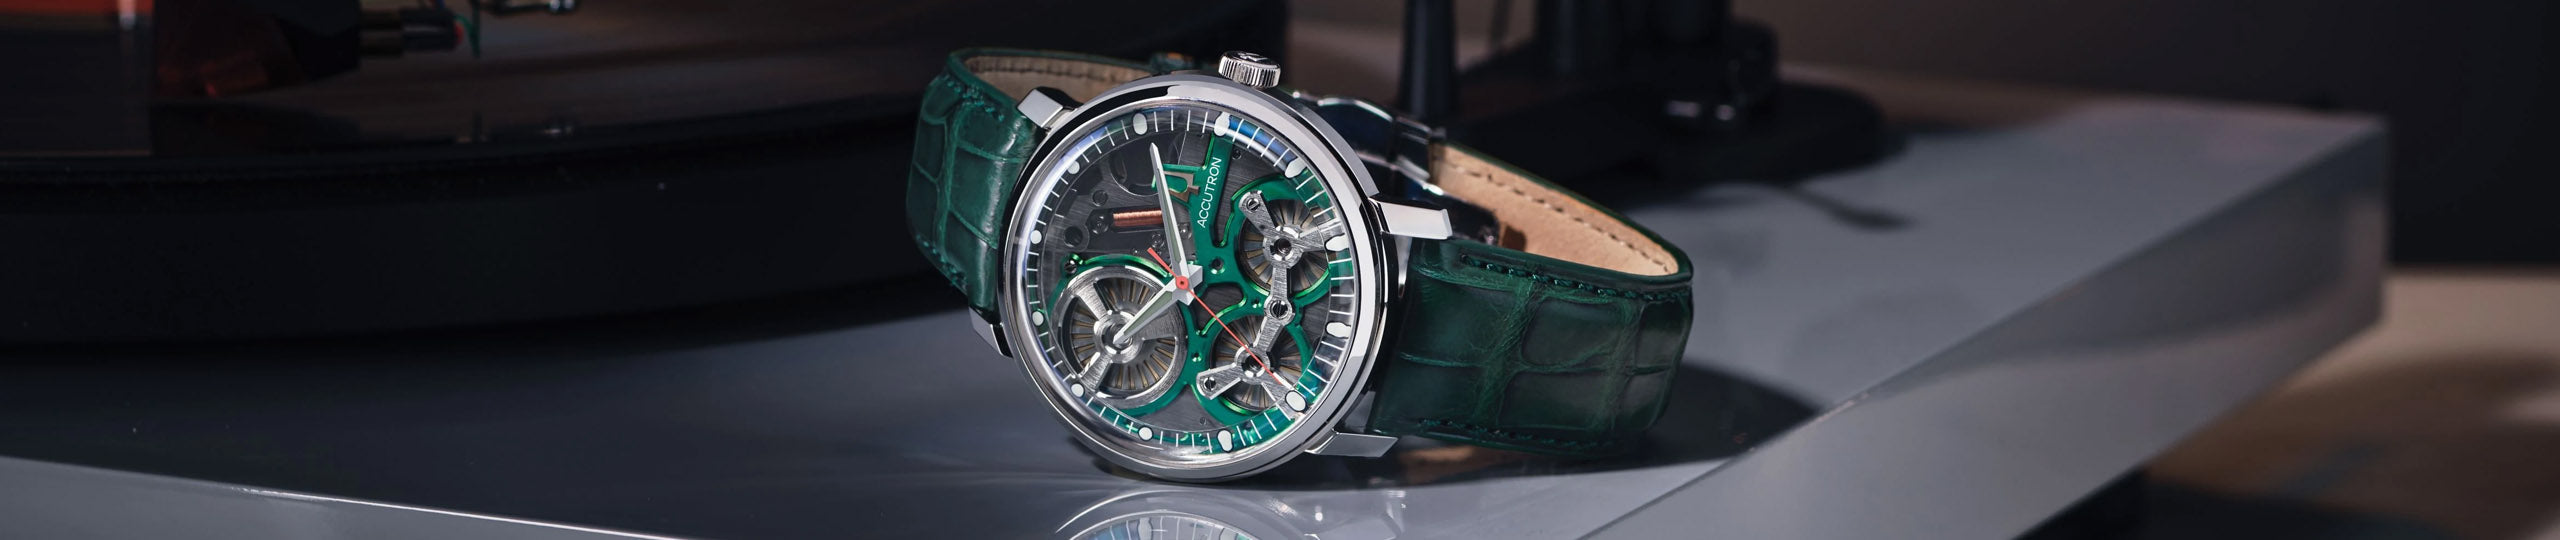 Bulova Accutron Spaceview 2020 Limited Edition of 300! | Value Your Watch